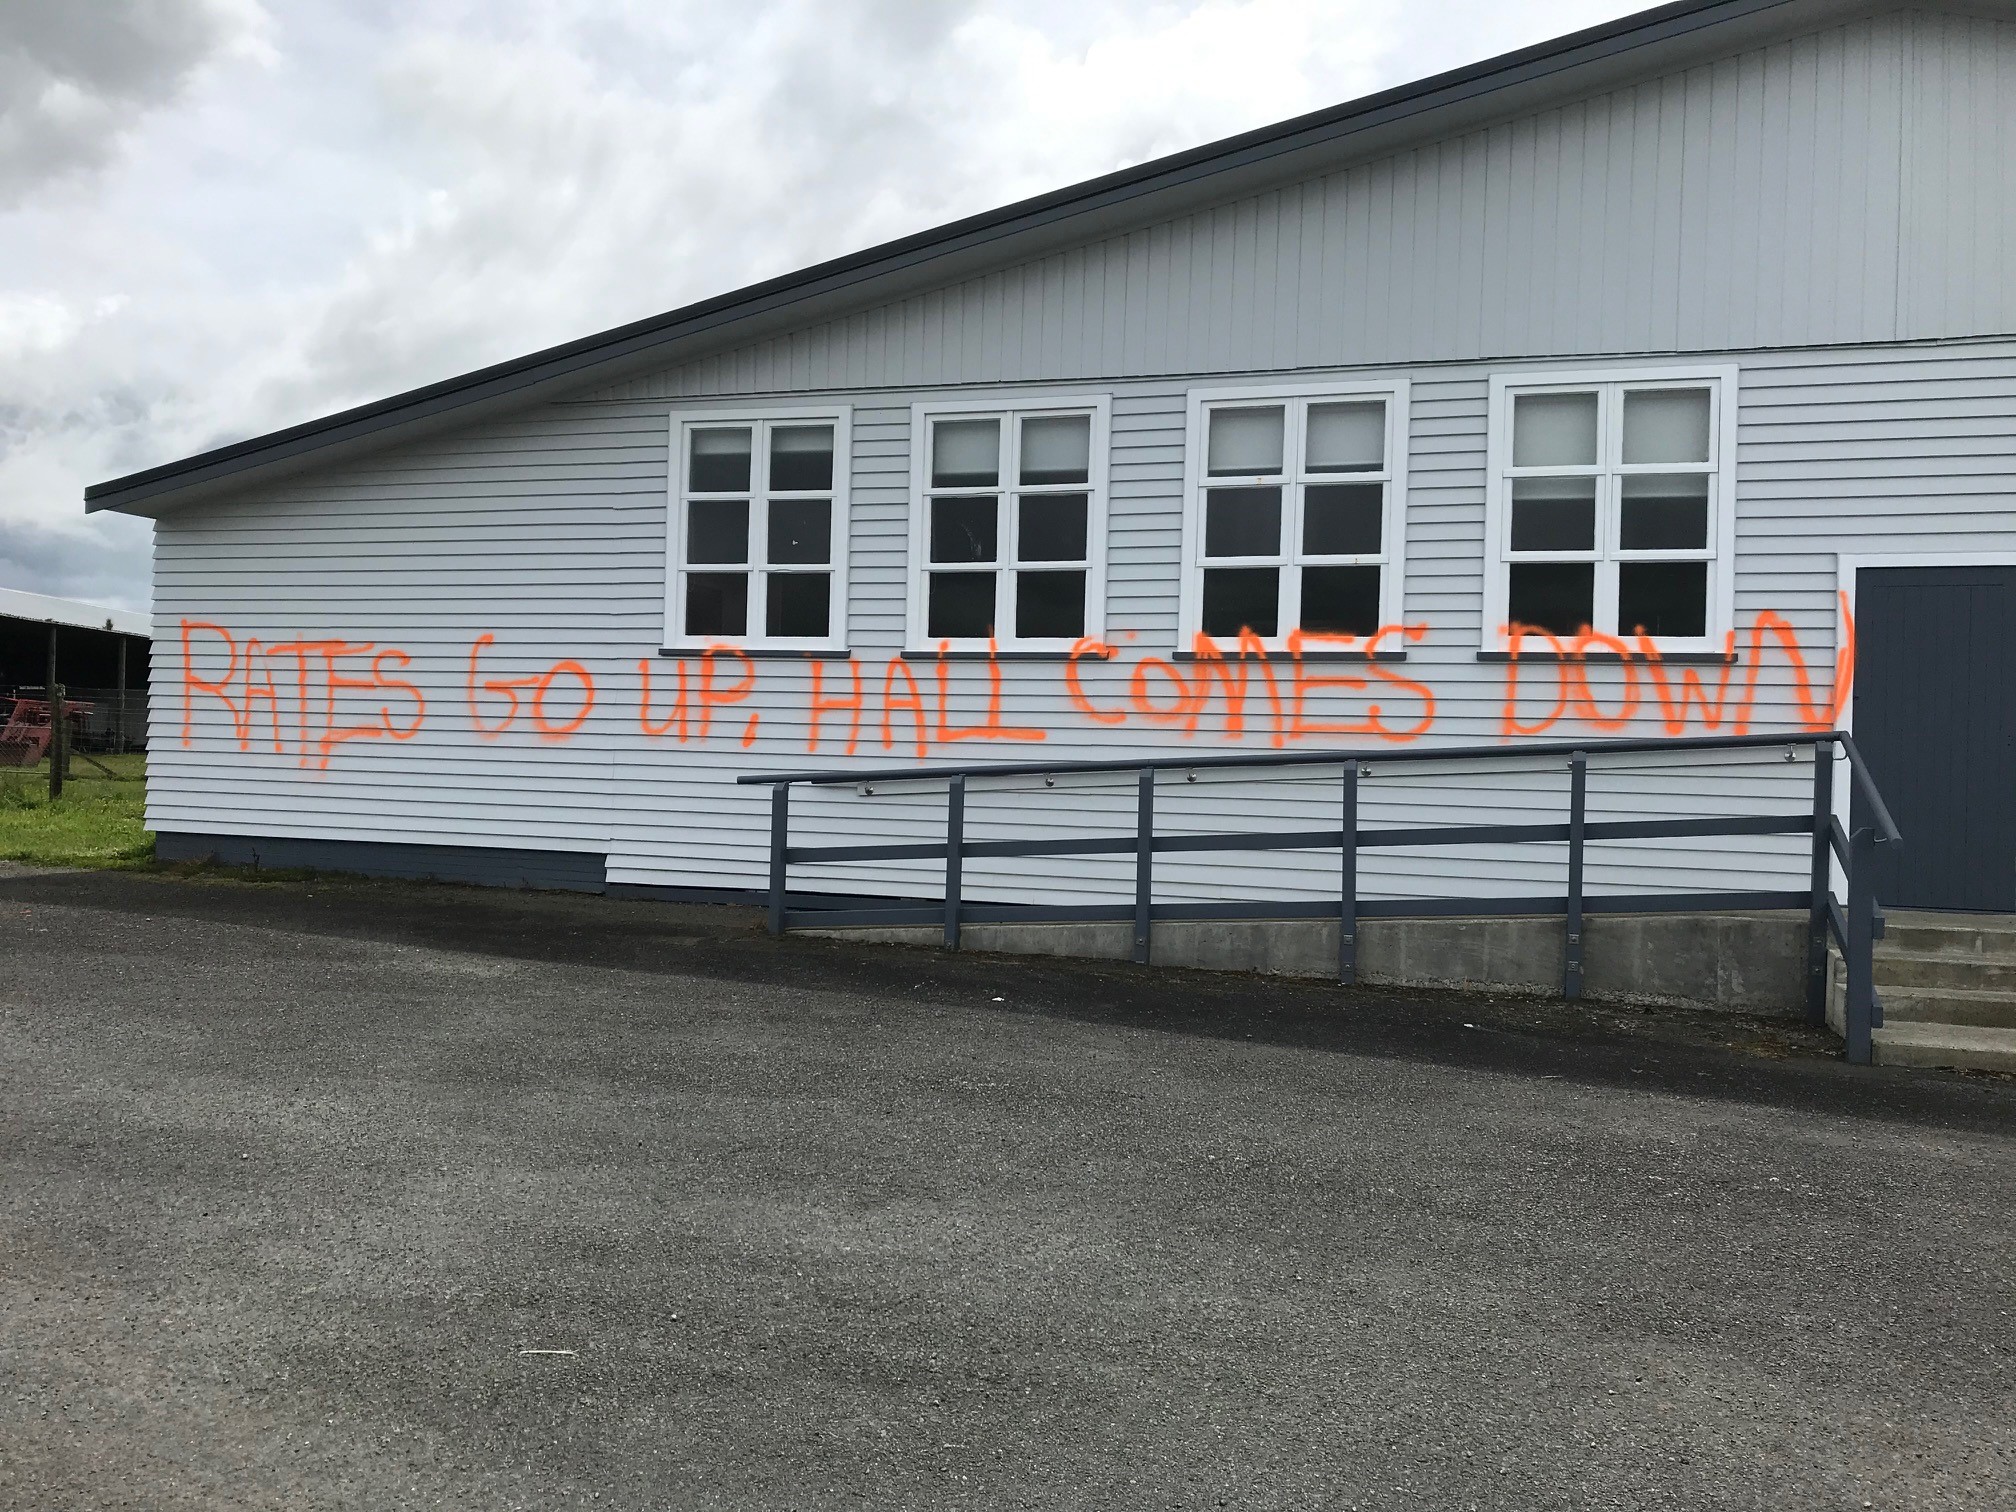 Photo of Midhirst Hall with graffiti writing that says 'Rates go up, hall comes down'